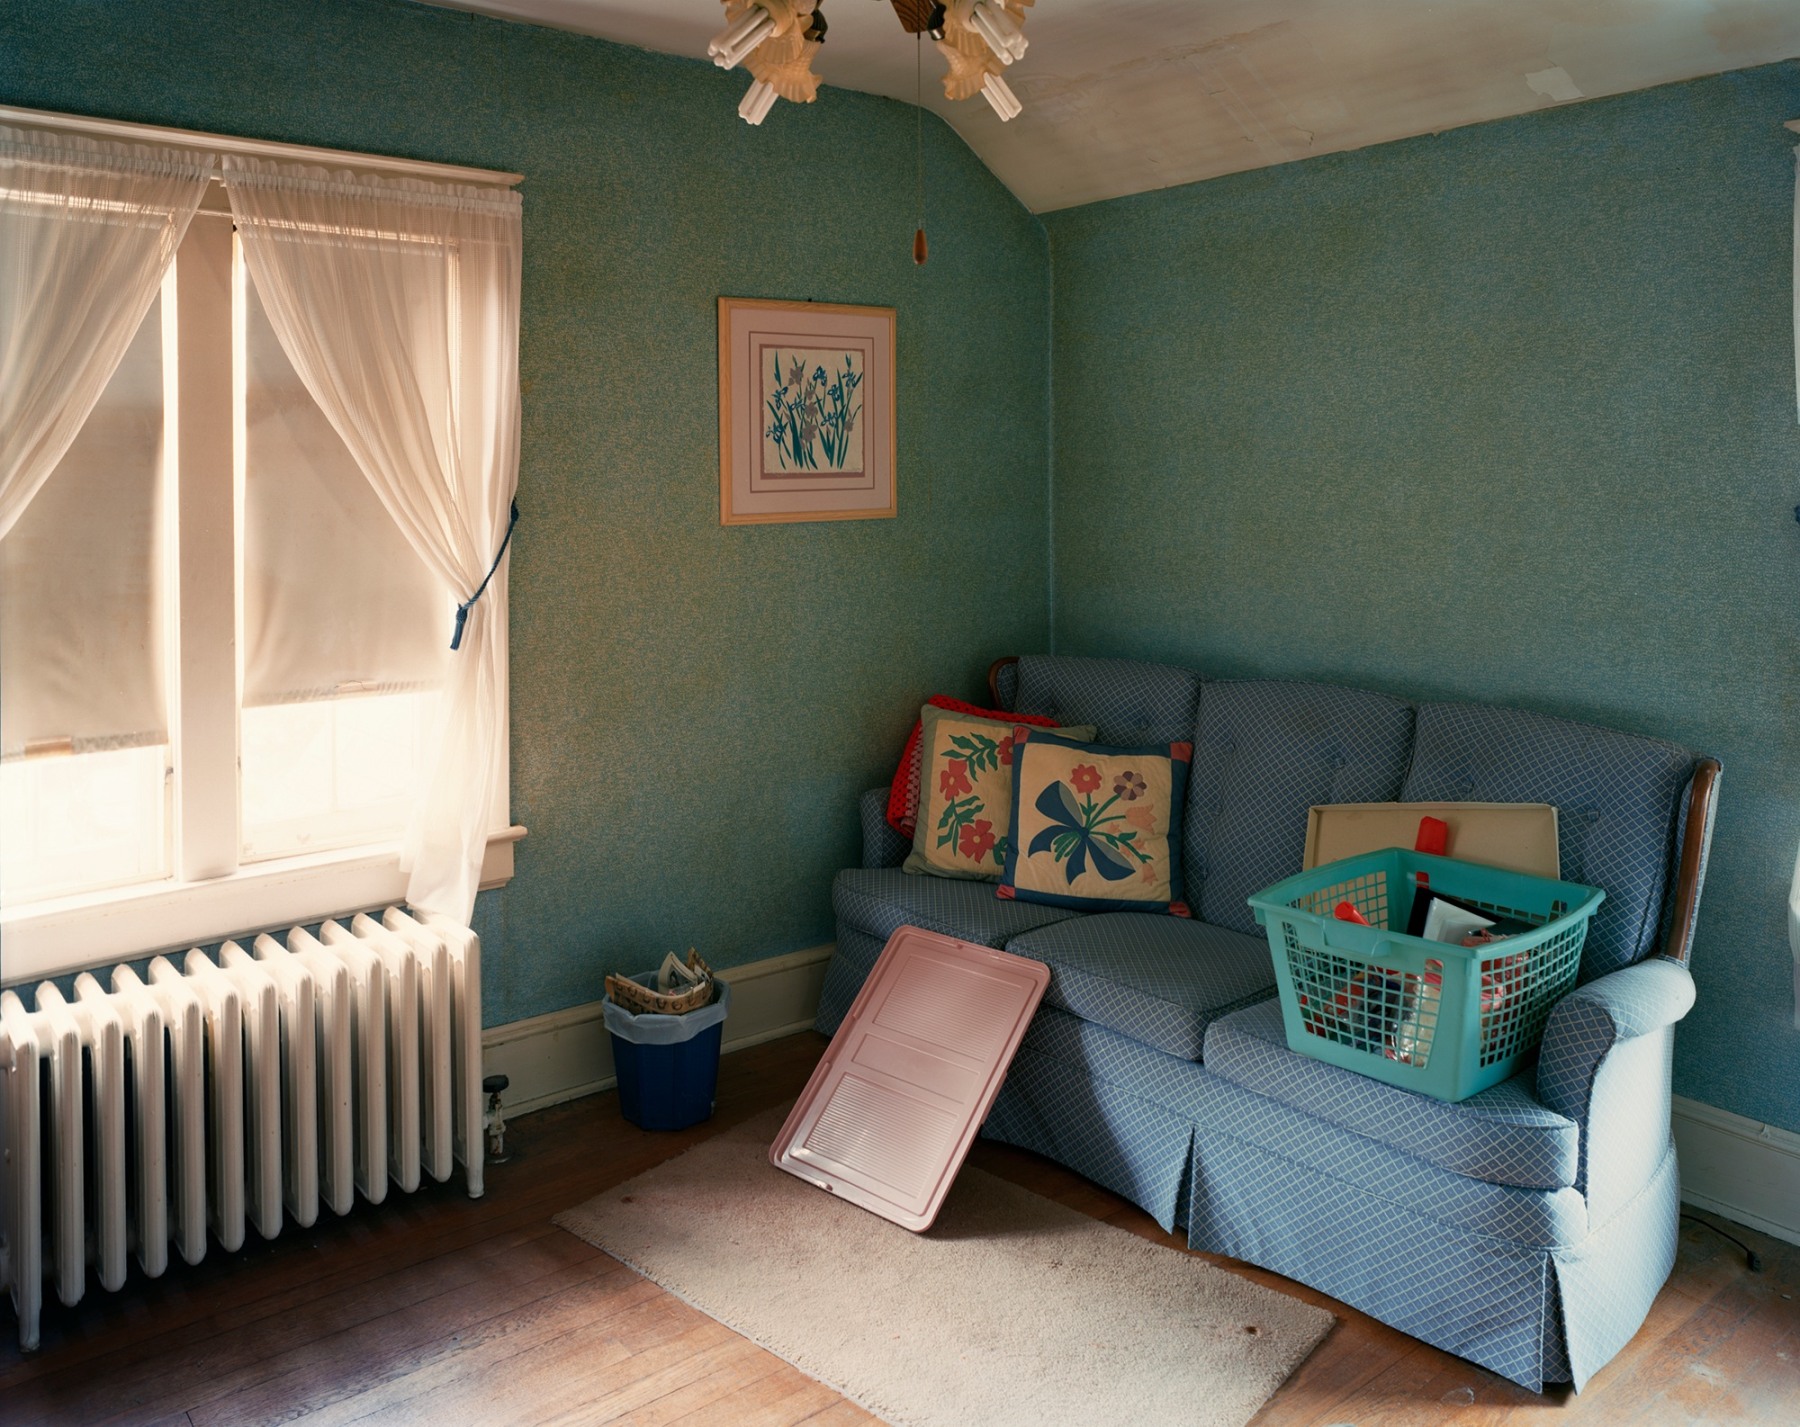 Photograph of den with radiator and blue couch, by Jade Doskow